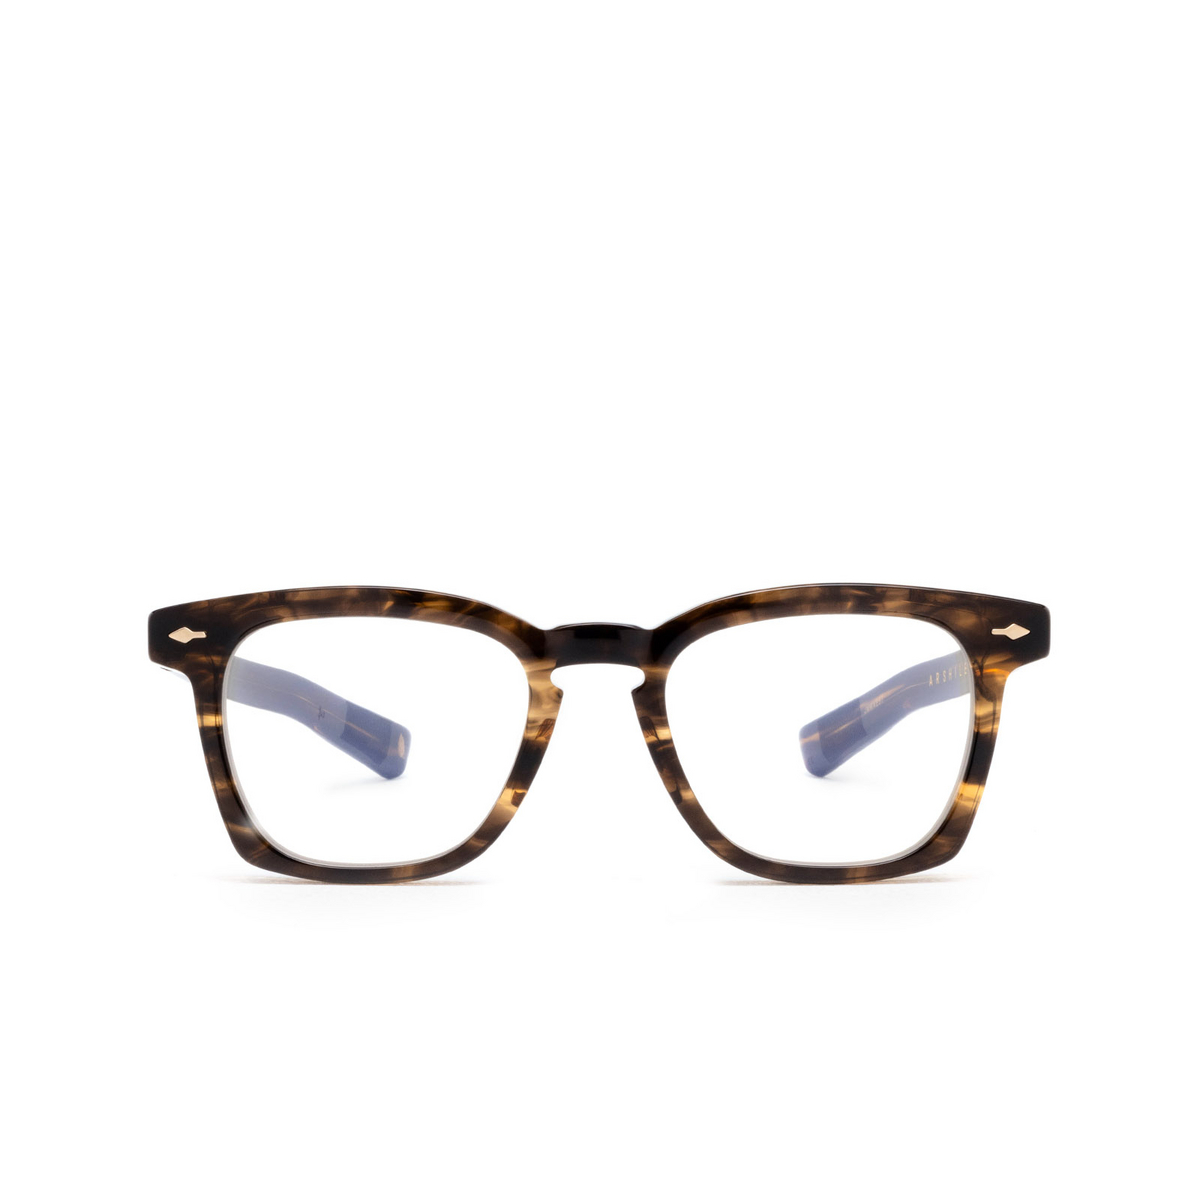 Jacques Marie Mage ARSHILE Eyeglasses FLASH - front view